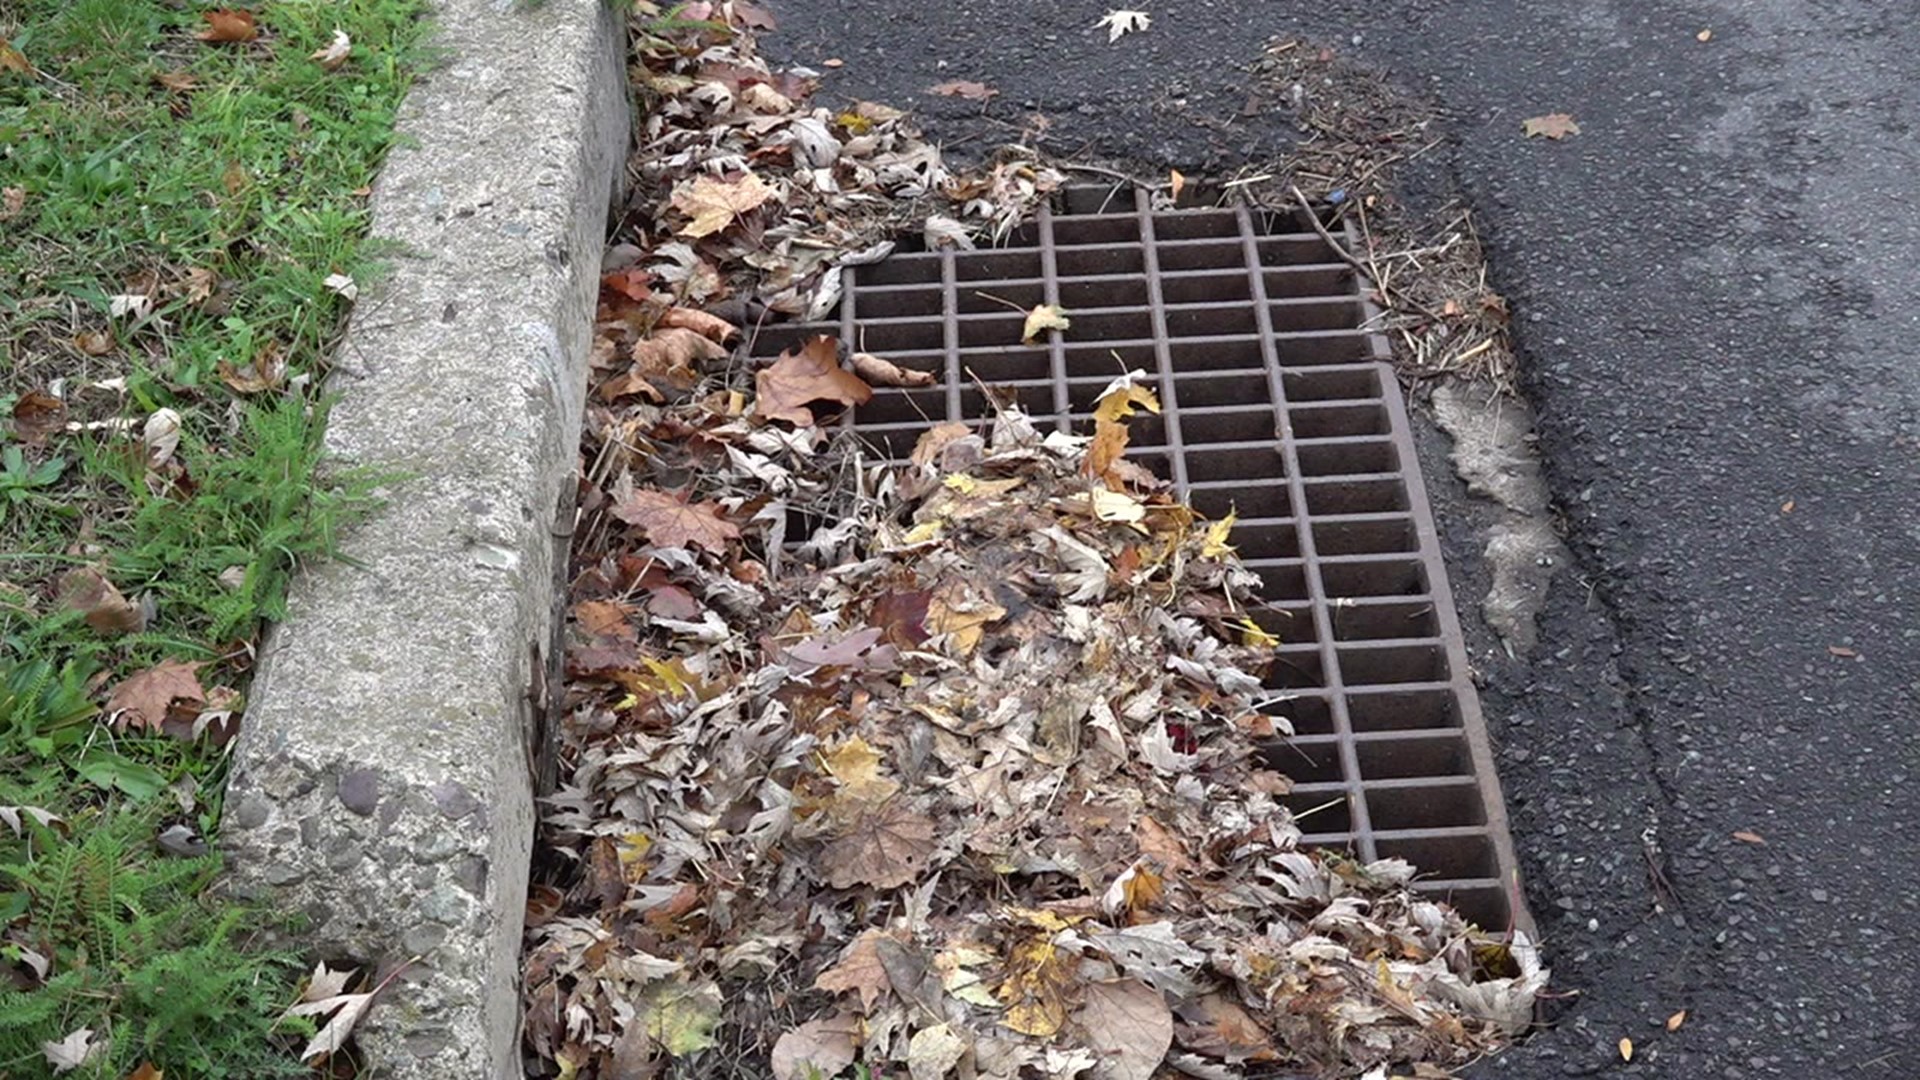 Newswatch 16's Claire Alfree shares how Pennsylvania American Water is calling on customers to help prevent leaves from clogging storm drains.